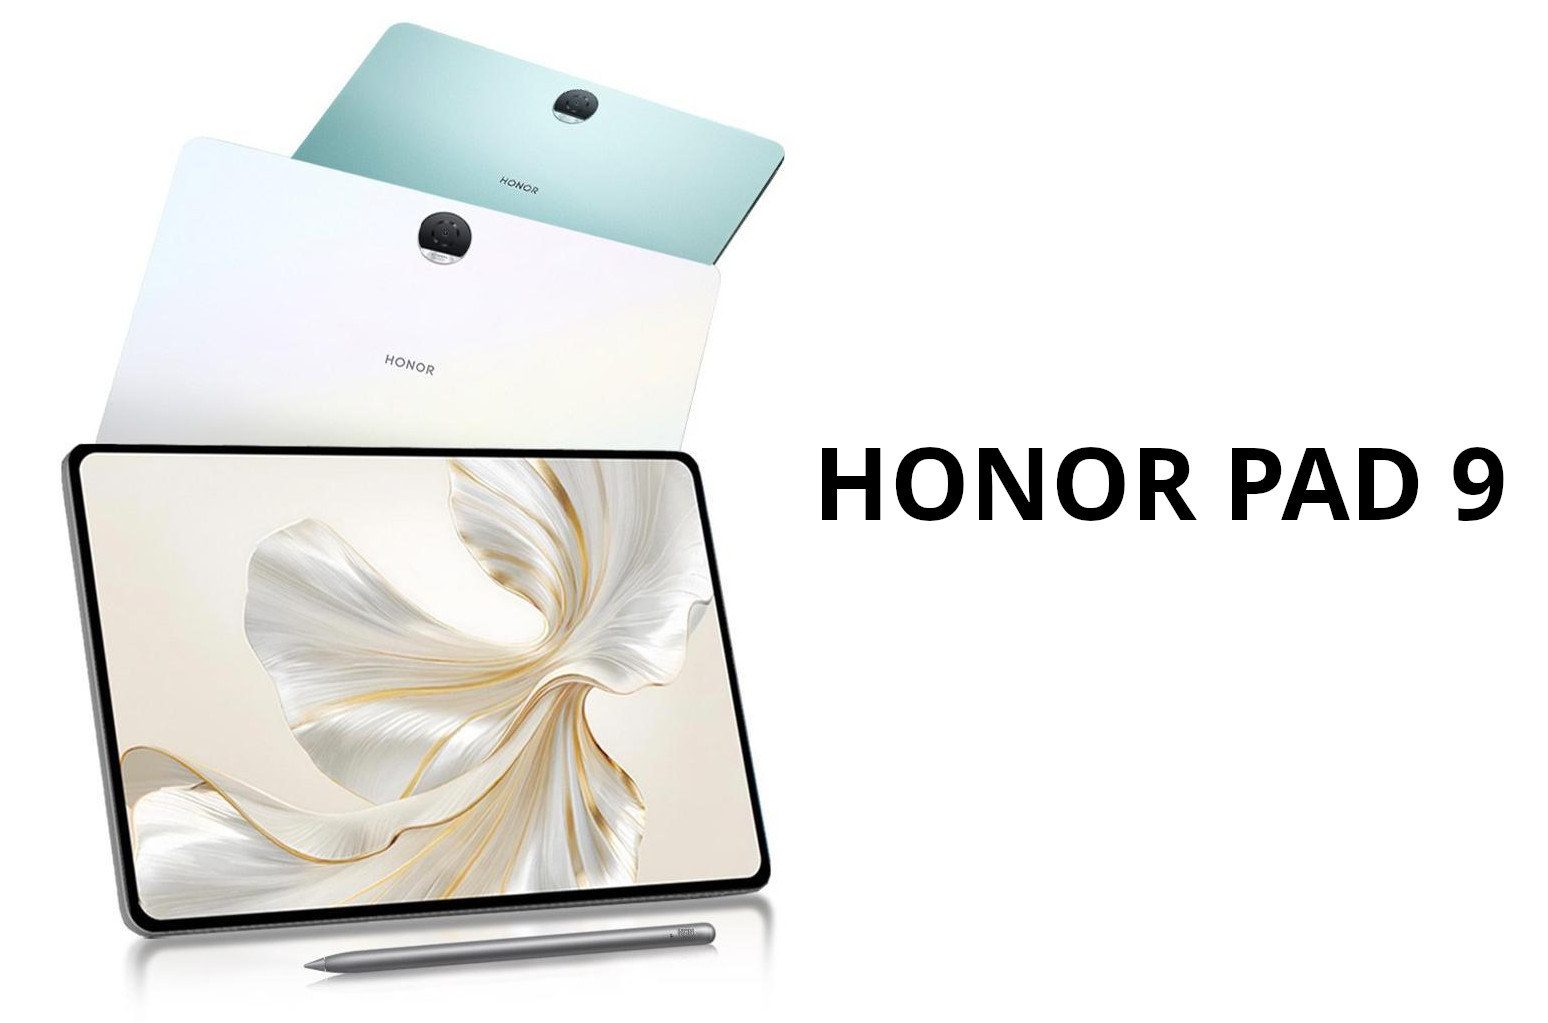 HONOR Pad 8 - Introduction, features, Performance